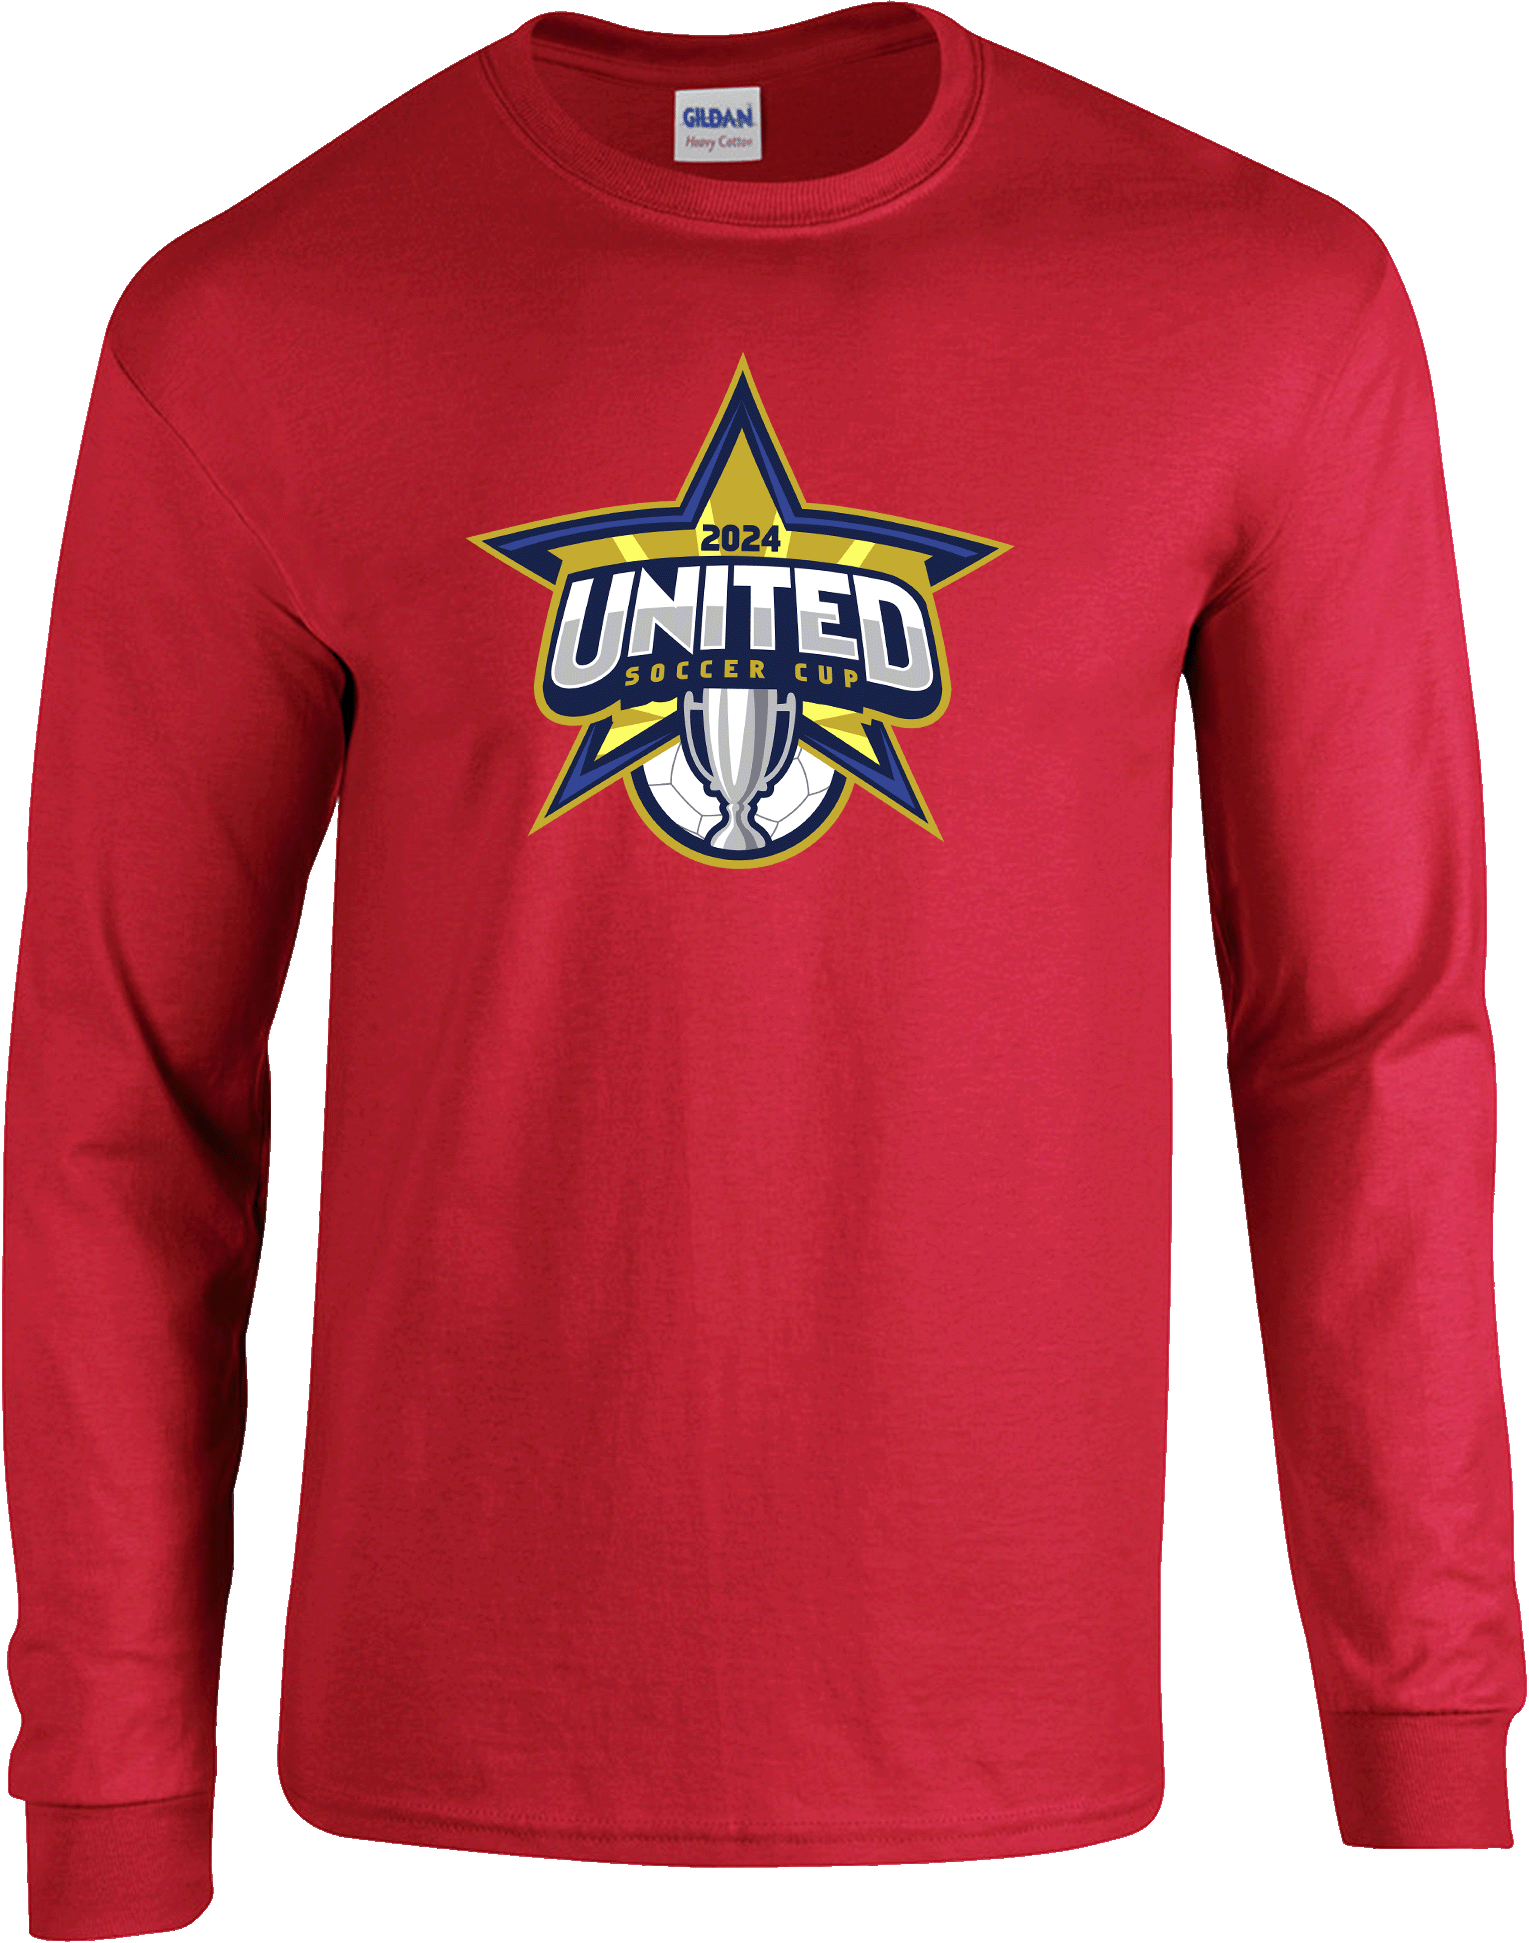 Long Sleeves - 2024 United Soccer Cup